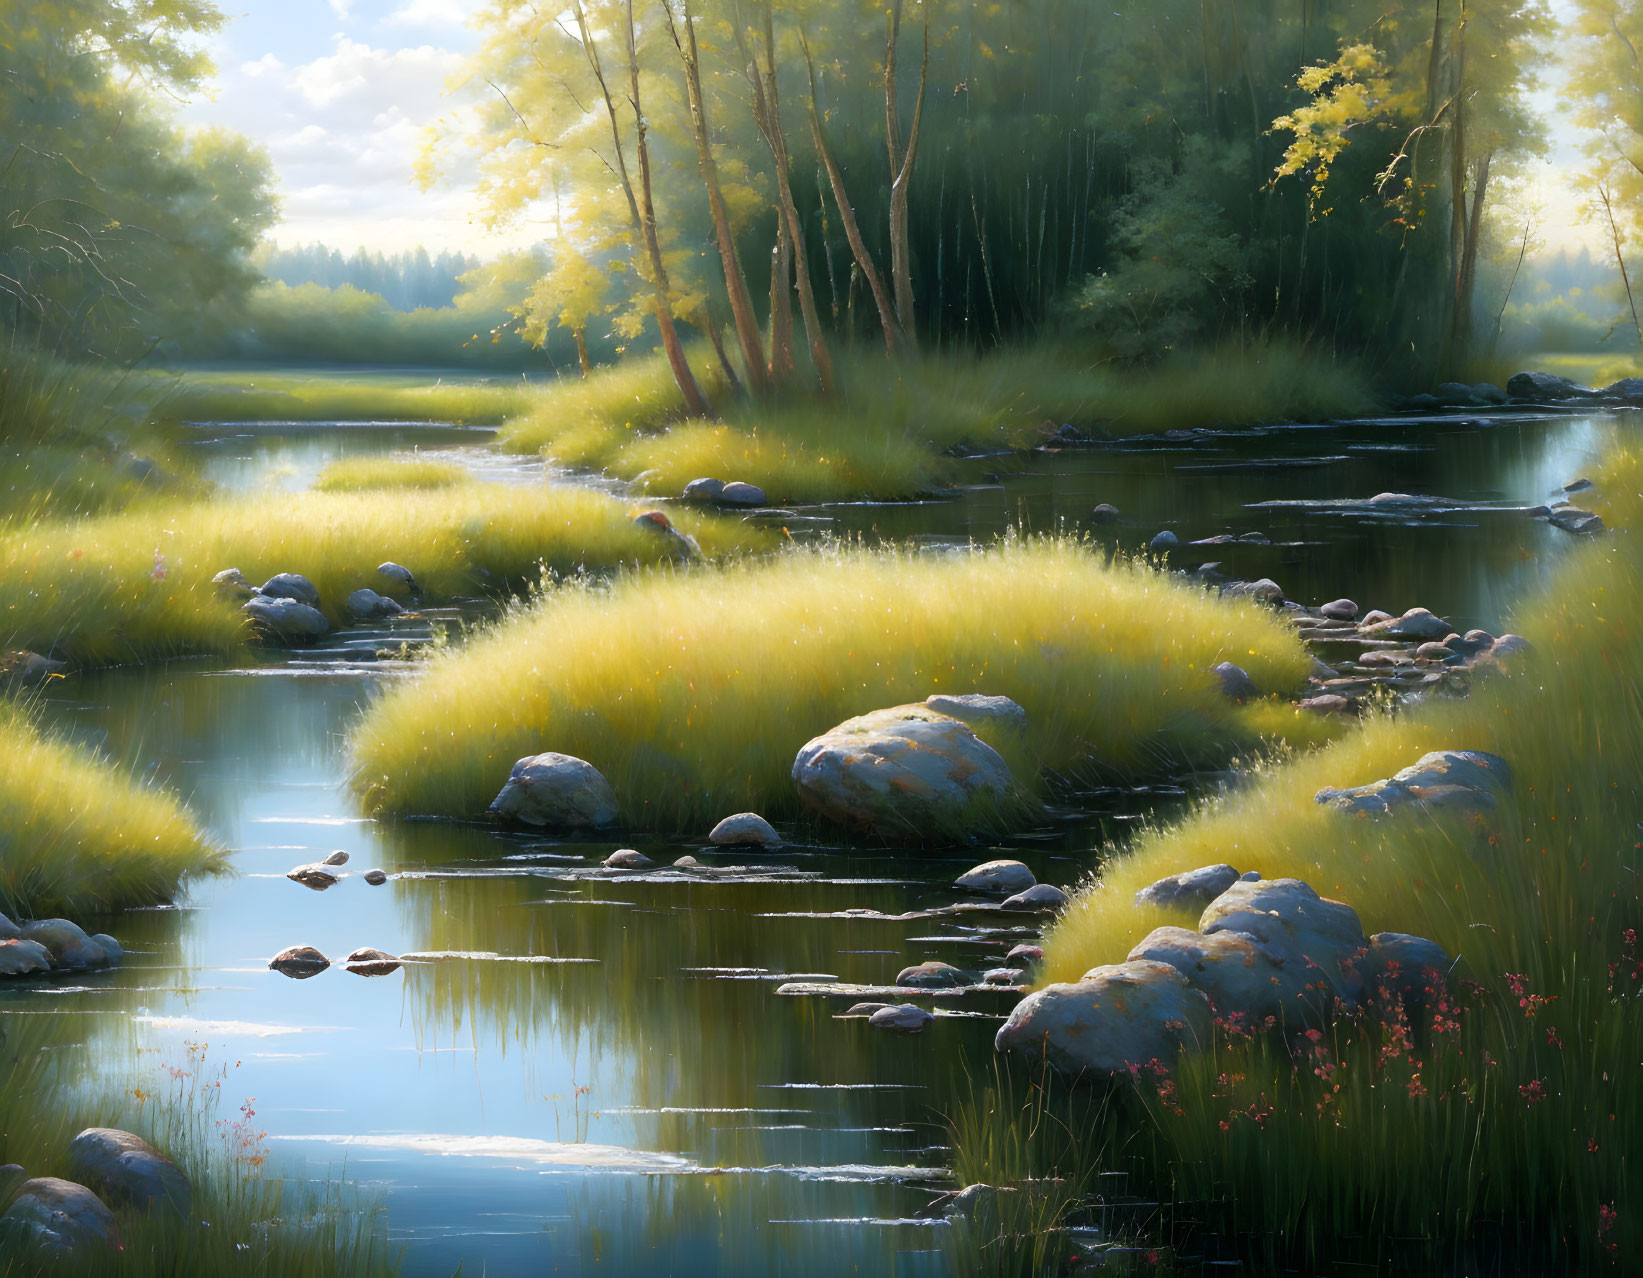 Tranquil riverscape with sunlight, trees, grassy banks, and stones